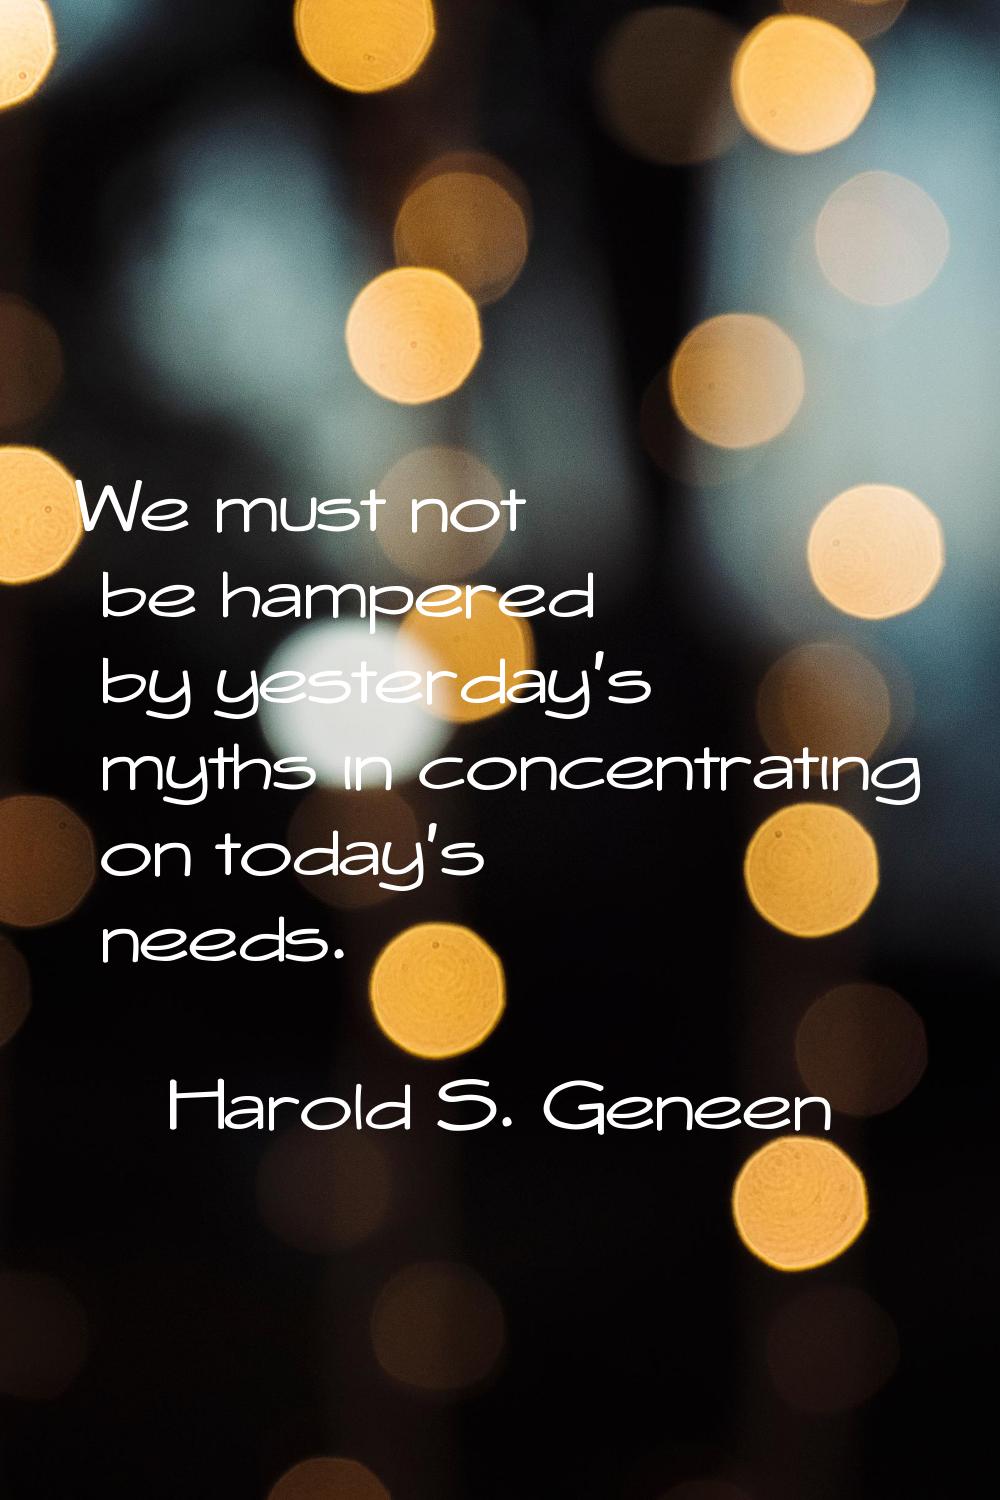 We must not be hampered by yesterday's myths in concentrating on today's needs.